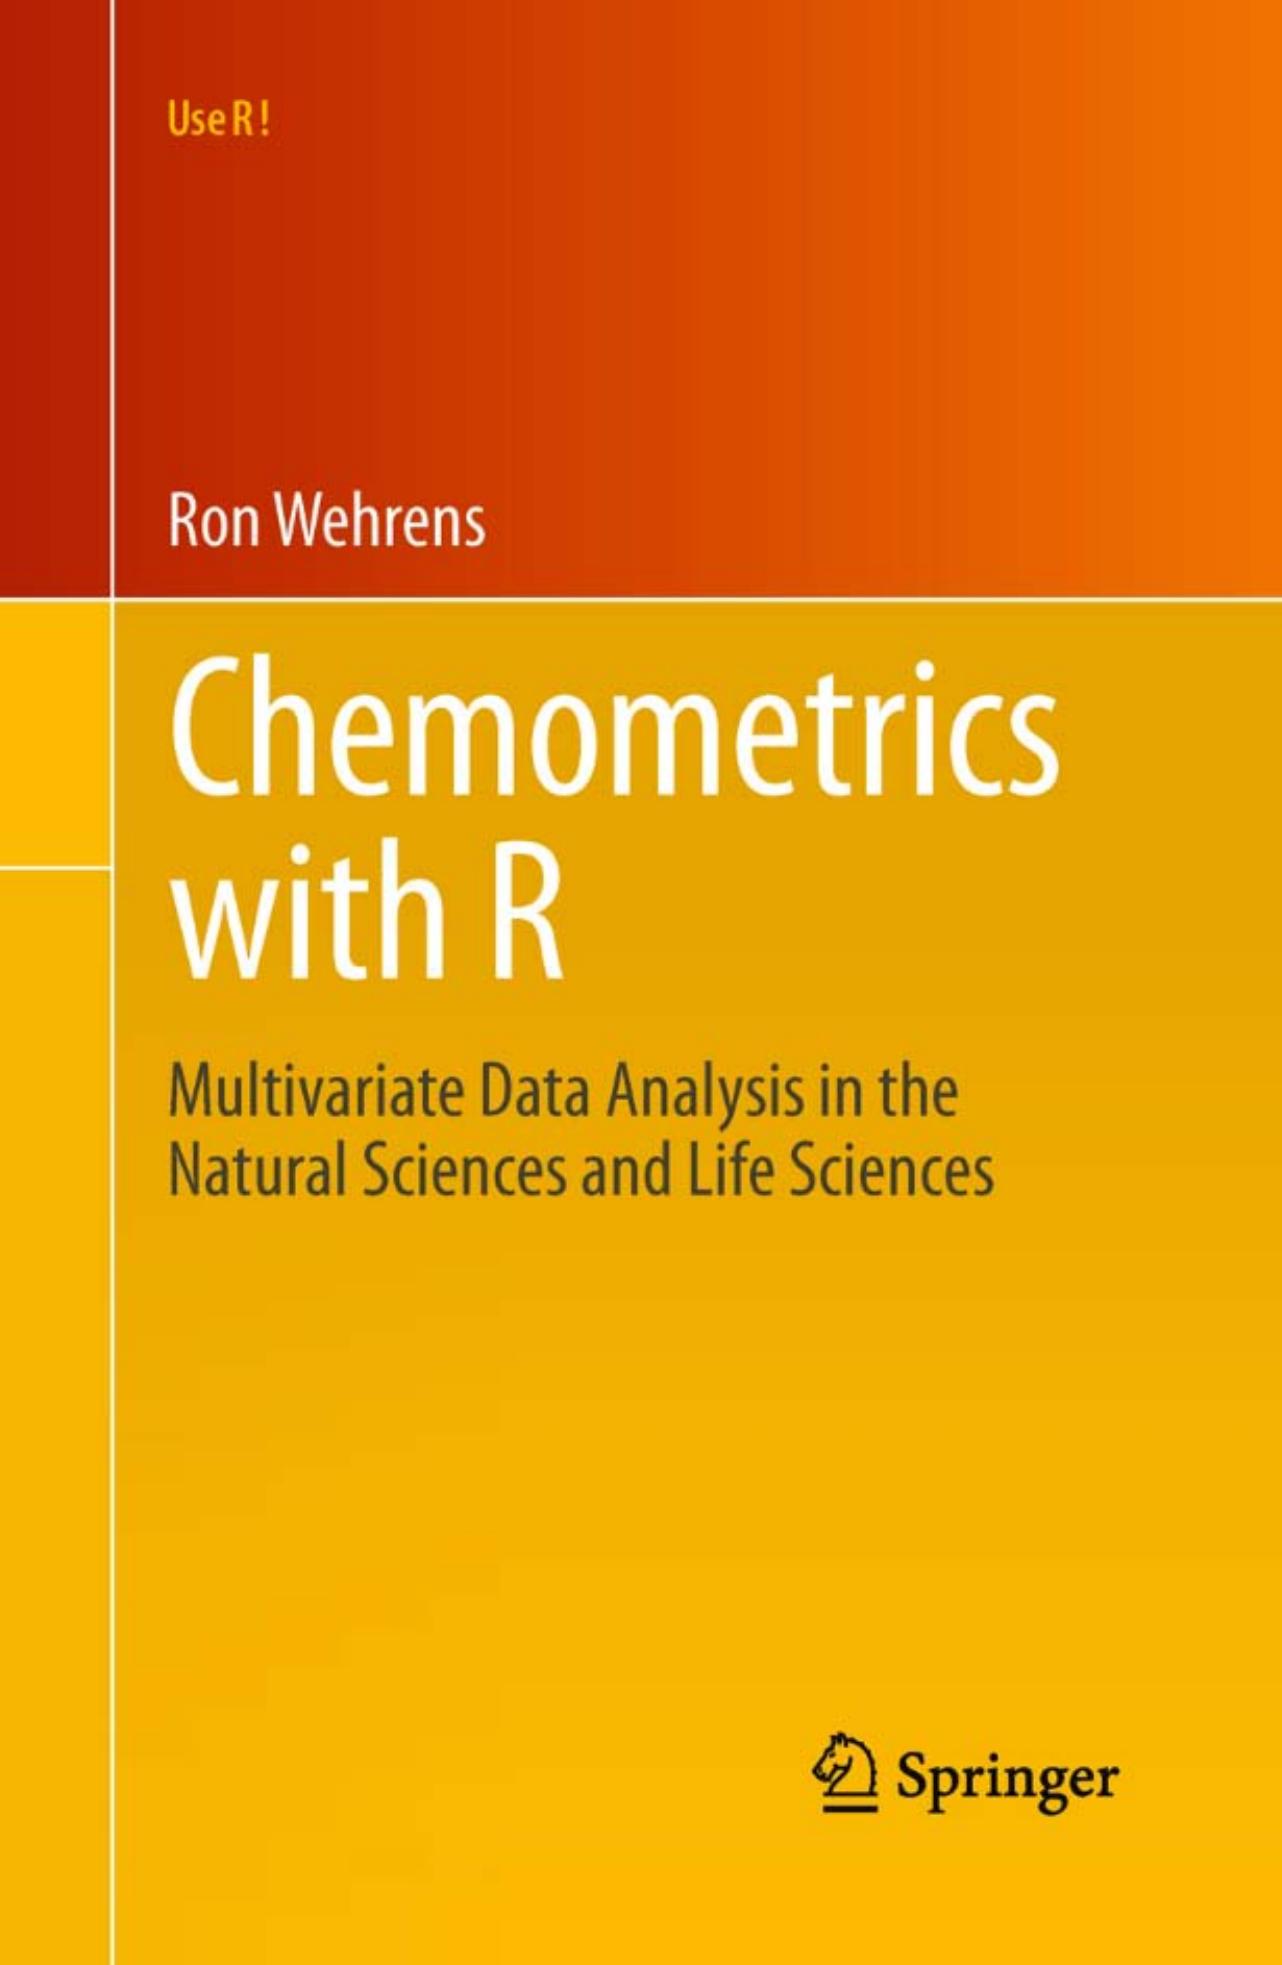 Chemometrics with R: Multivariate Data Analysis in the Natural Sciences and Life Sciences (Use R) by Ron Wehrens